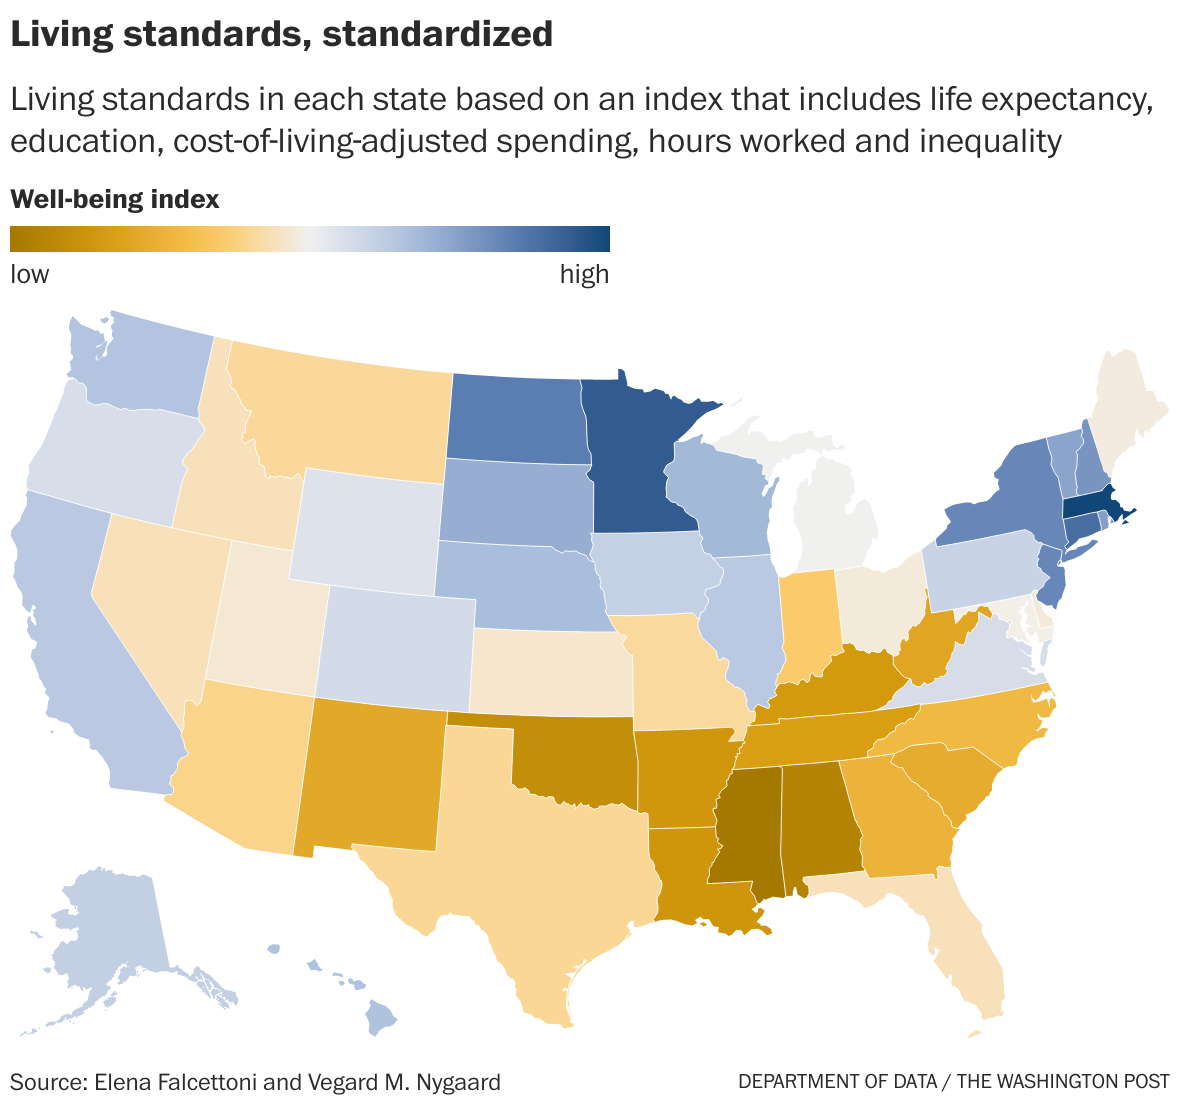 Minnesota and Massachusetts are the best states for humans. And more